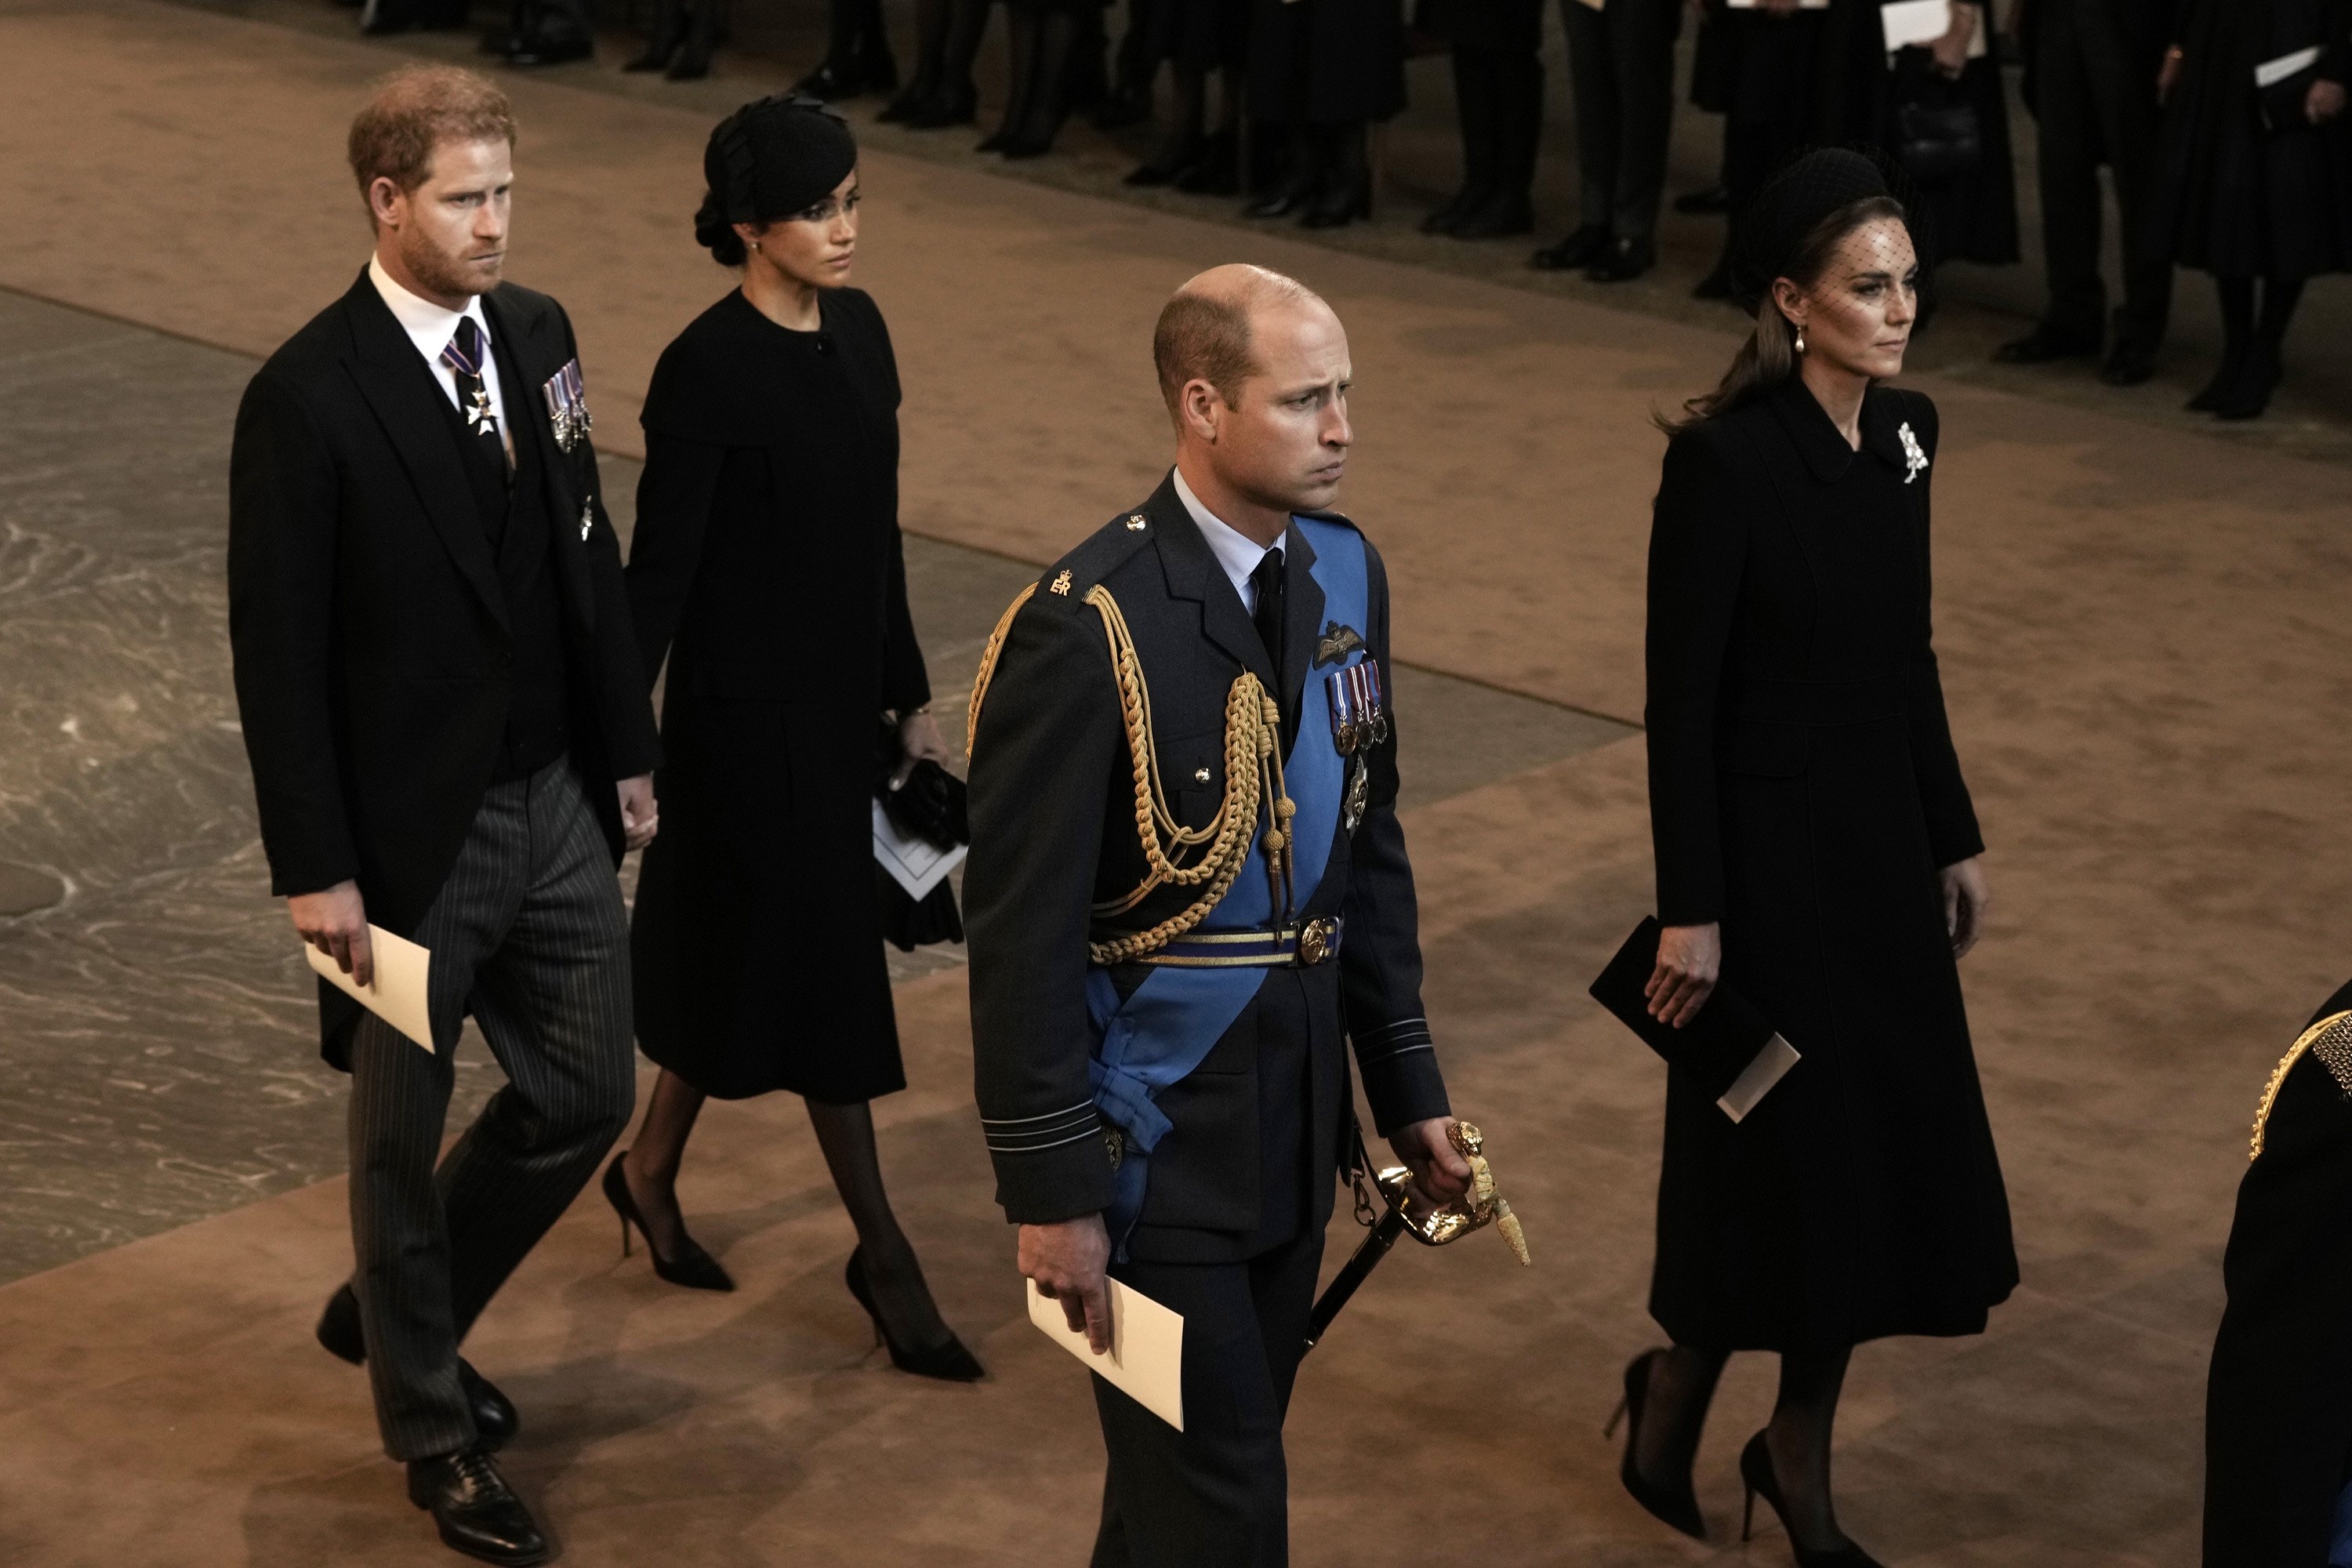 Prince Harry, Duke of Sussex and Meghan, Duchess of Sussex, Prince William, Prince of Wales and Catherine, Princess of Wales walk behind the coffin as they arrive in The Palace of Westminster after the procession for the Lying-in State of Queen Elizabeth II on September 14, 2022 in London, England | Source: Getty Images 